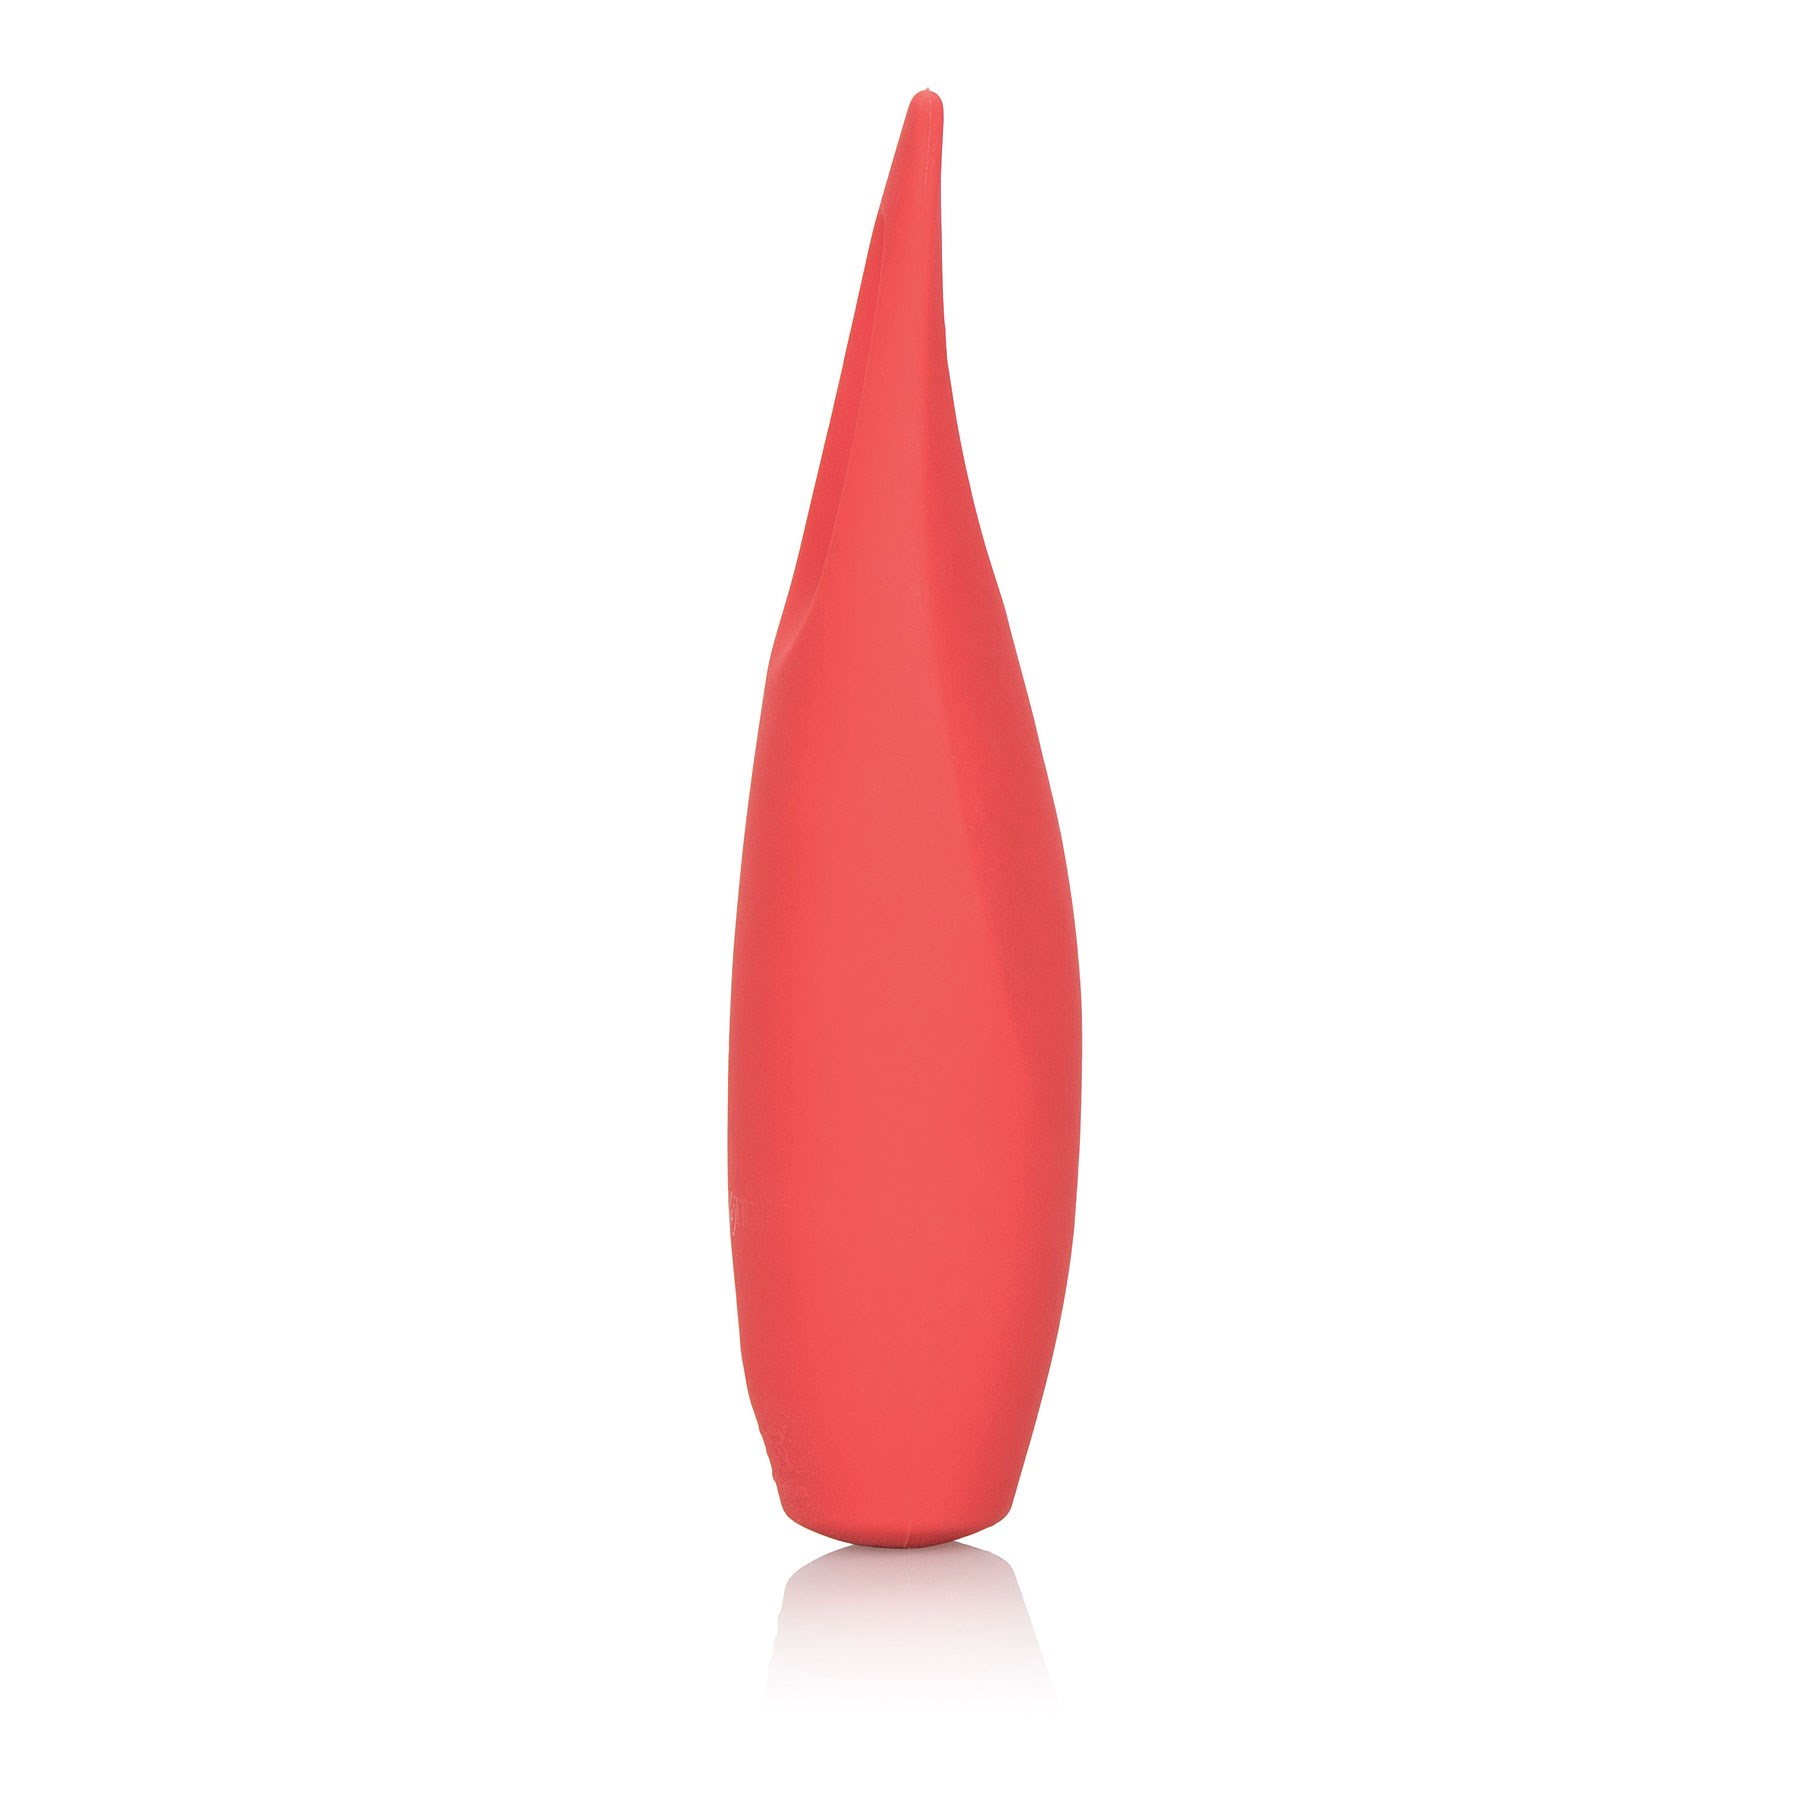 Red Hot Spark Clitoral Vibe standing upright